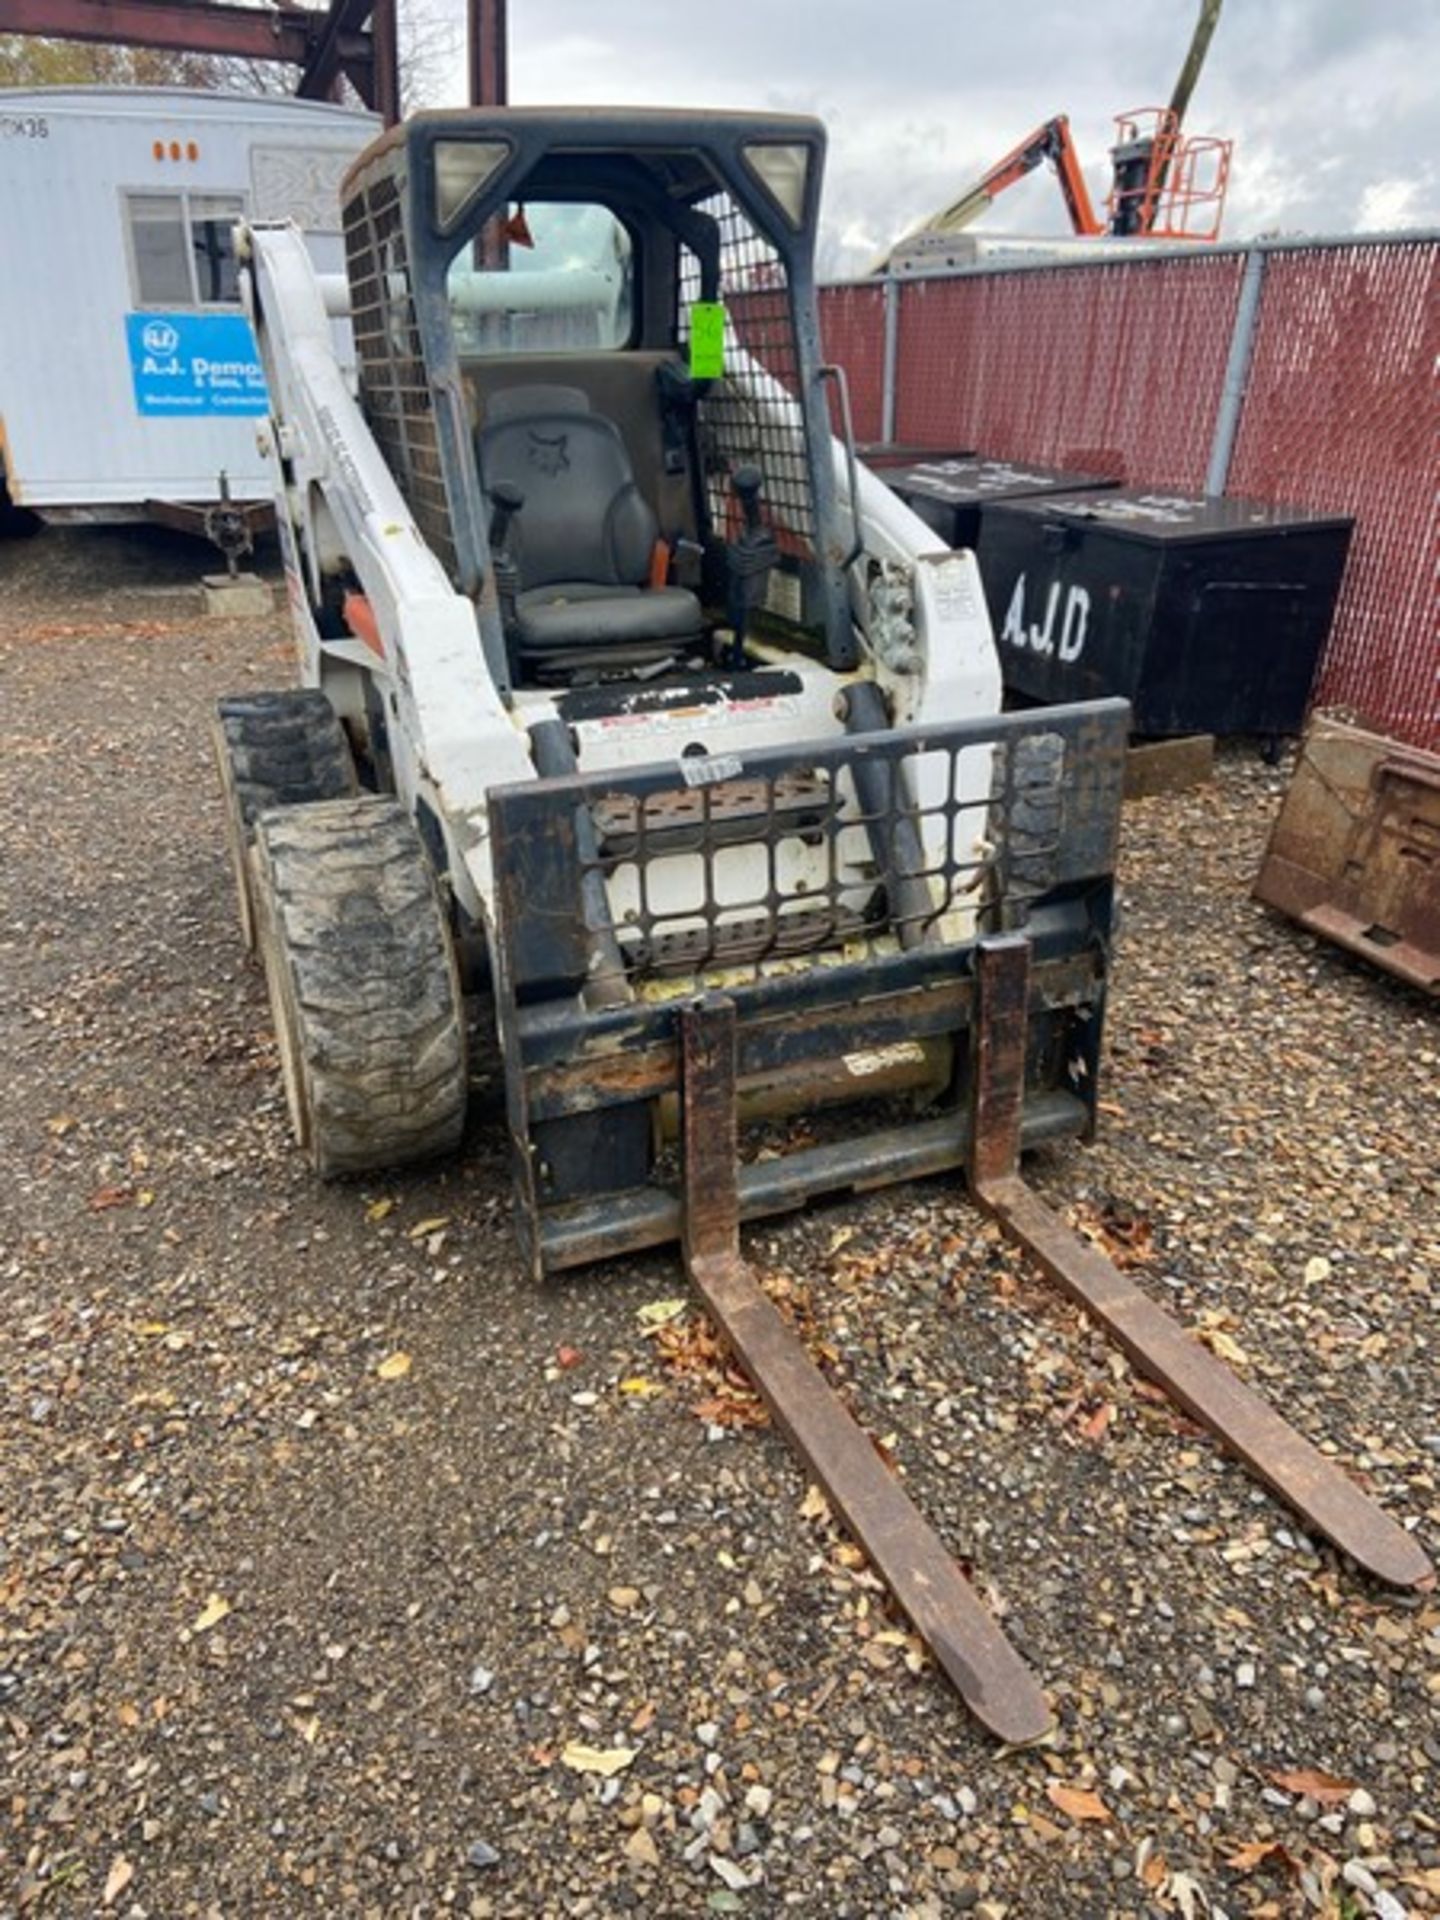 2010 Bobcat S250 Compact Skid Steer, VIN#: A5GM36985, with Fork Attachment (NOTE: DELAYED REMOVAL - Bild 2 aus 12